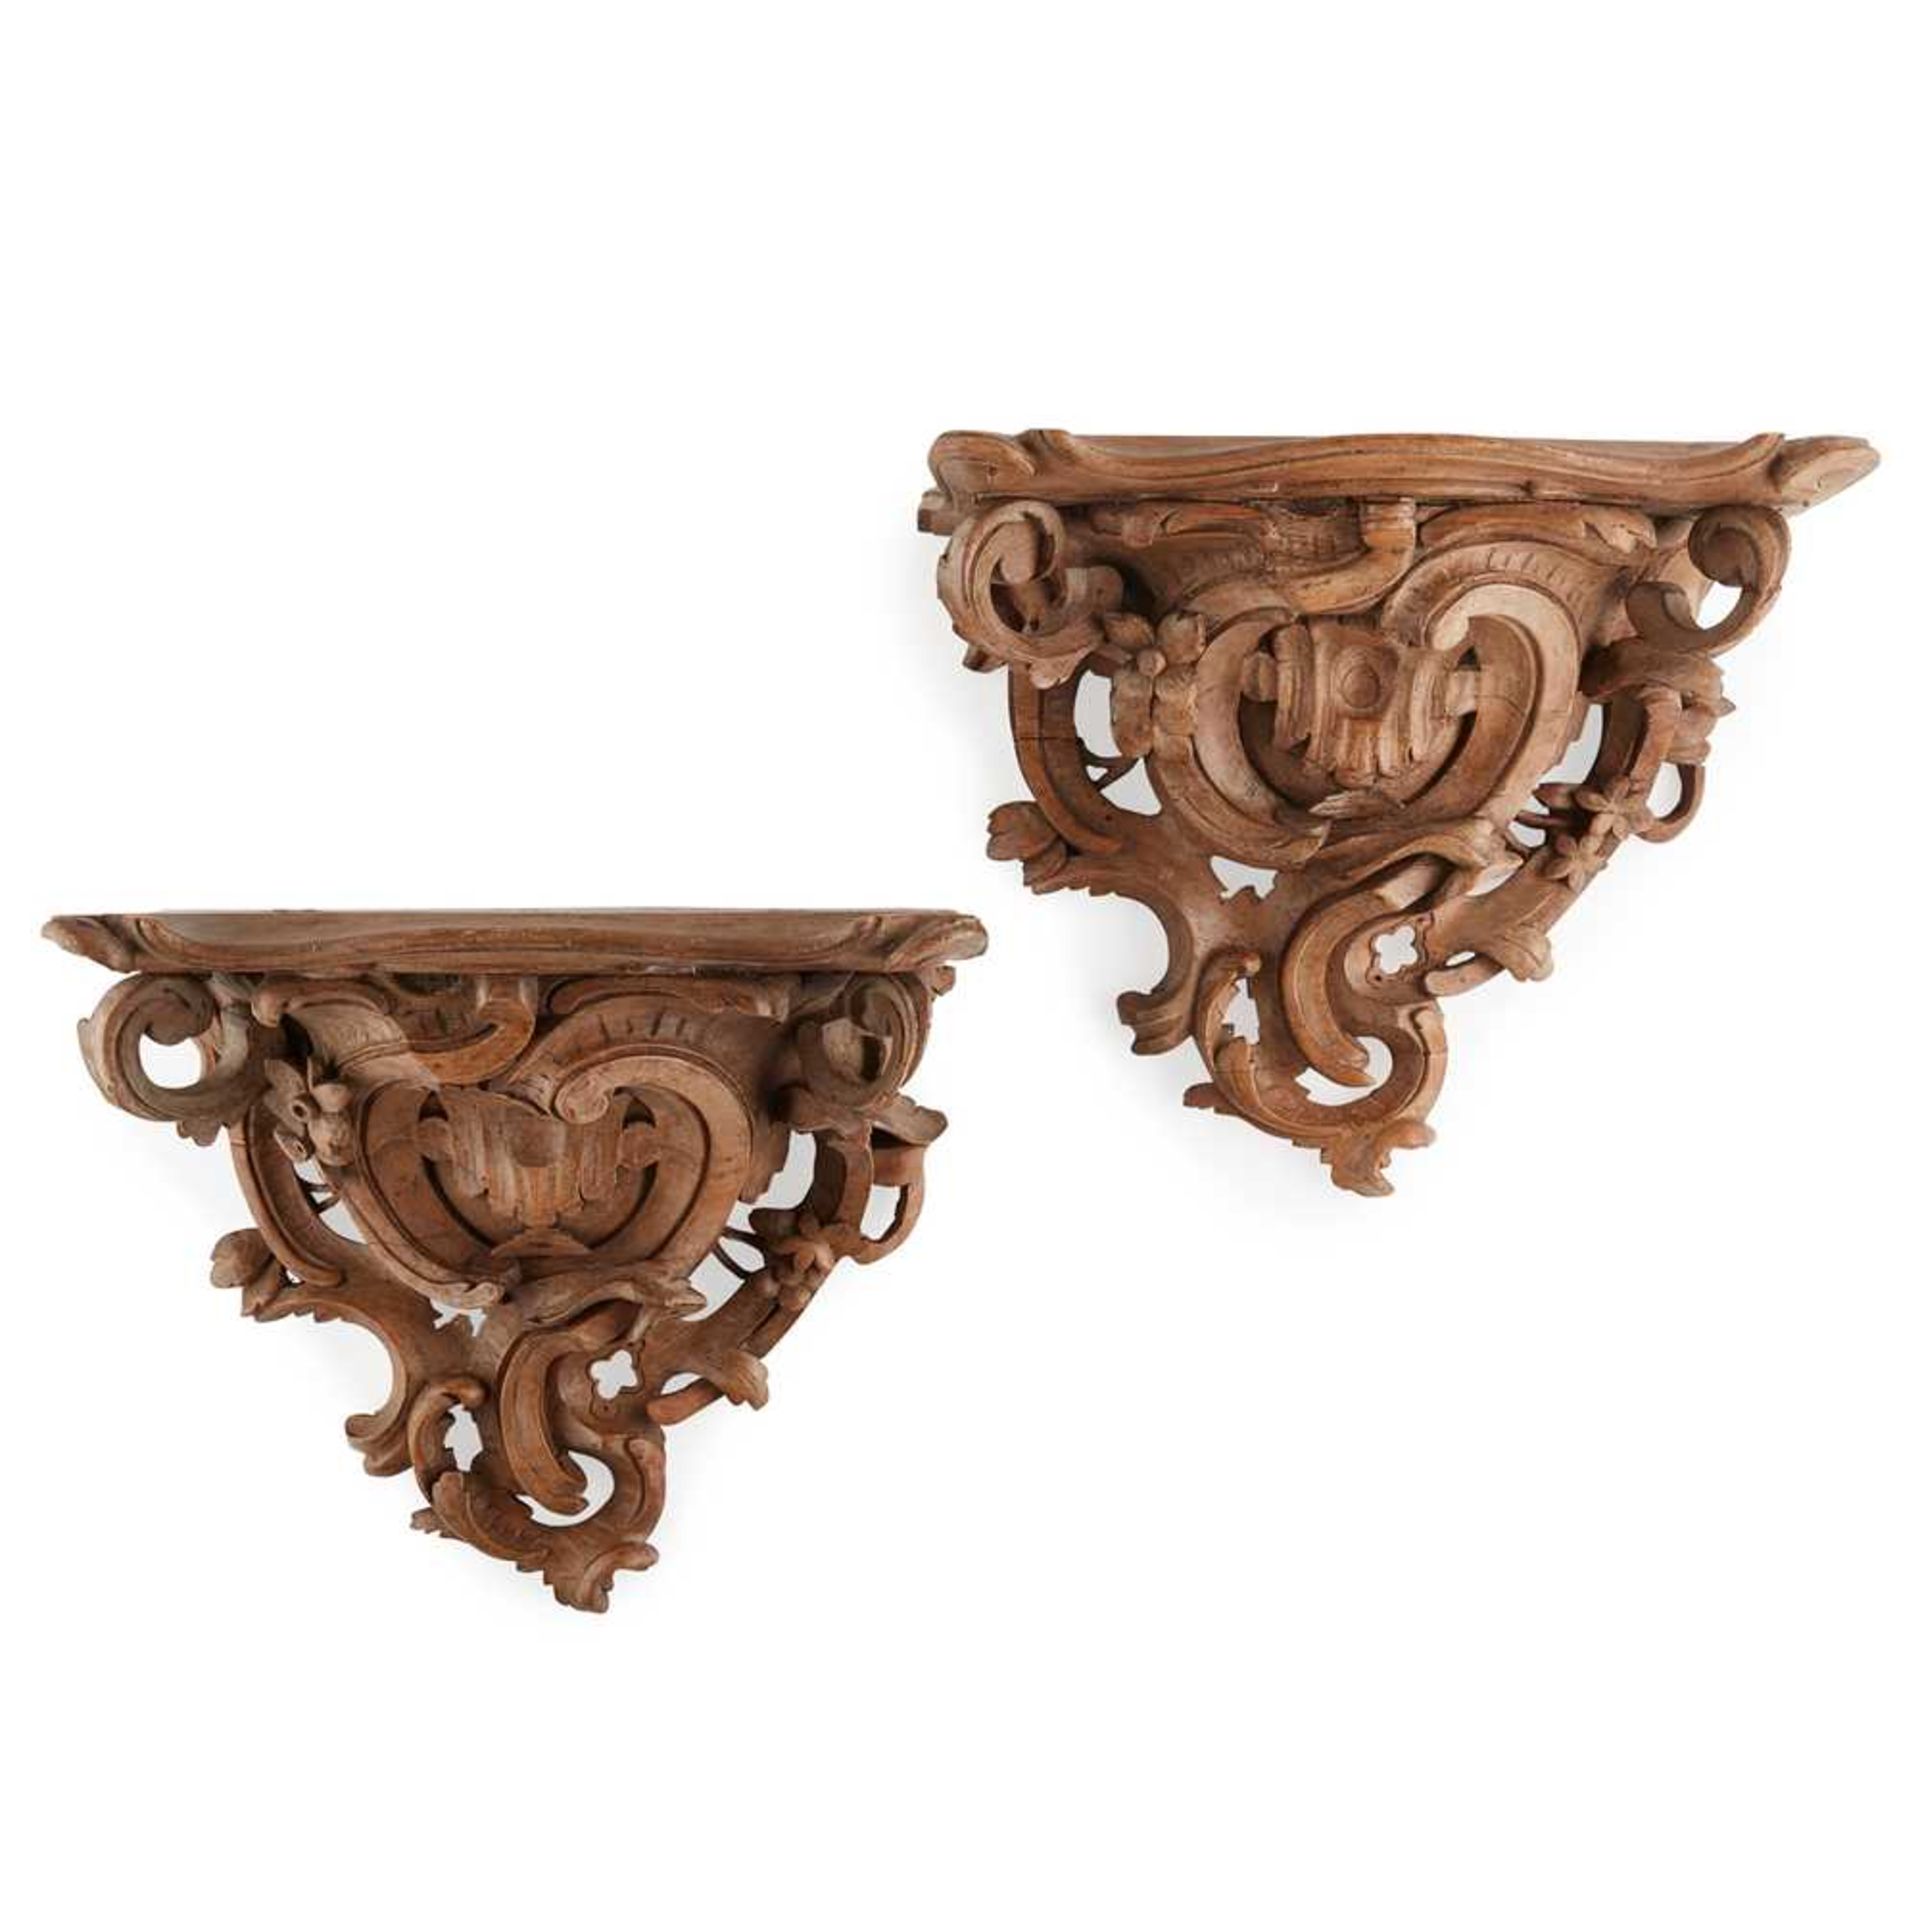 PAIR OF ROCOCO STYLE CARVED FRUITWOOD WALL BRACKETS 19TH CENTURY